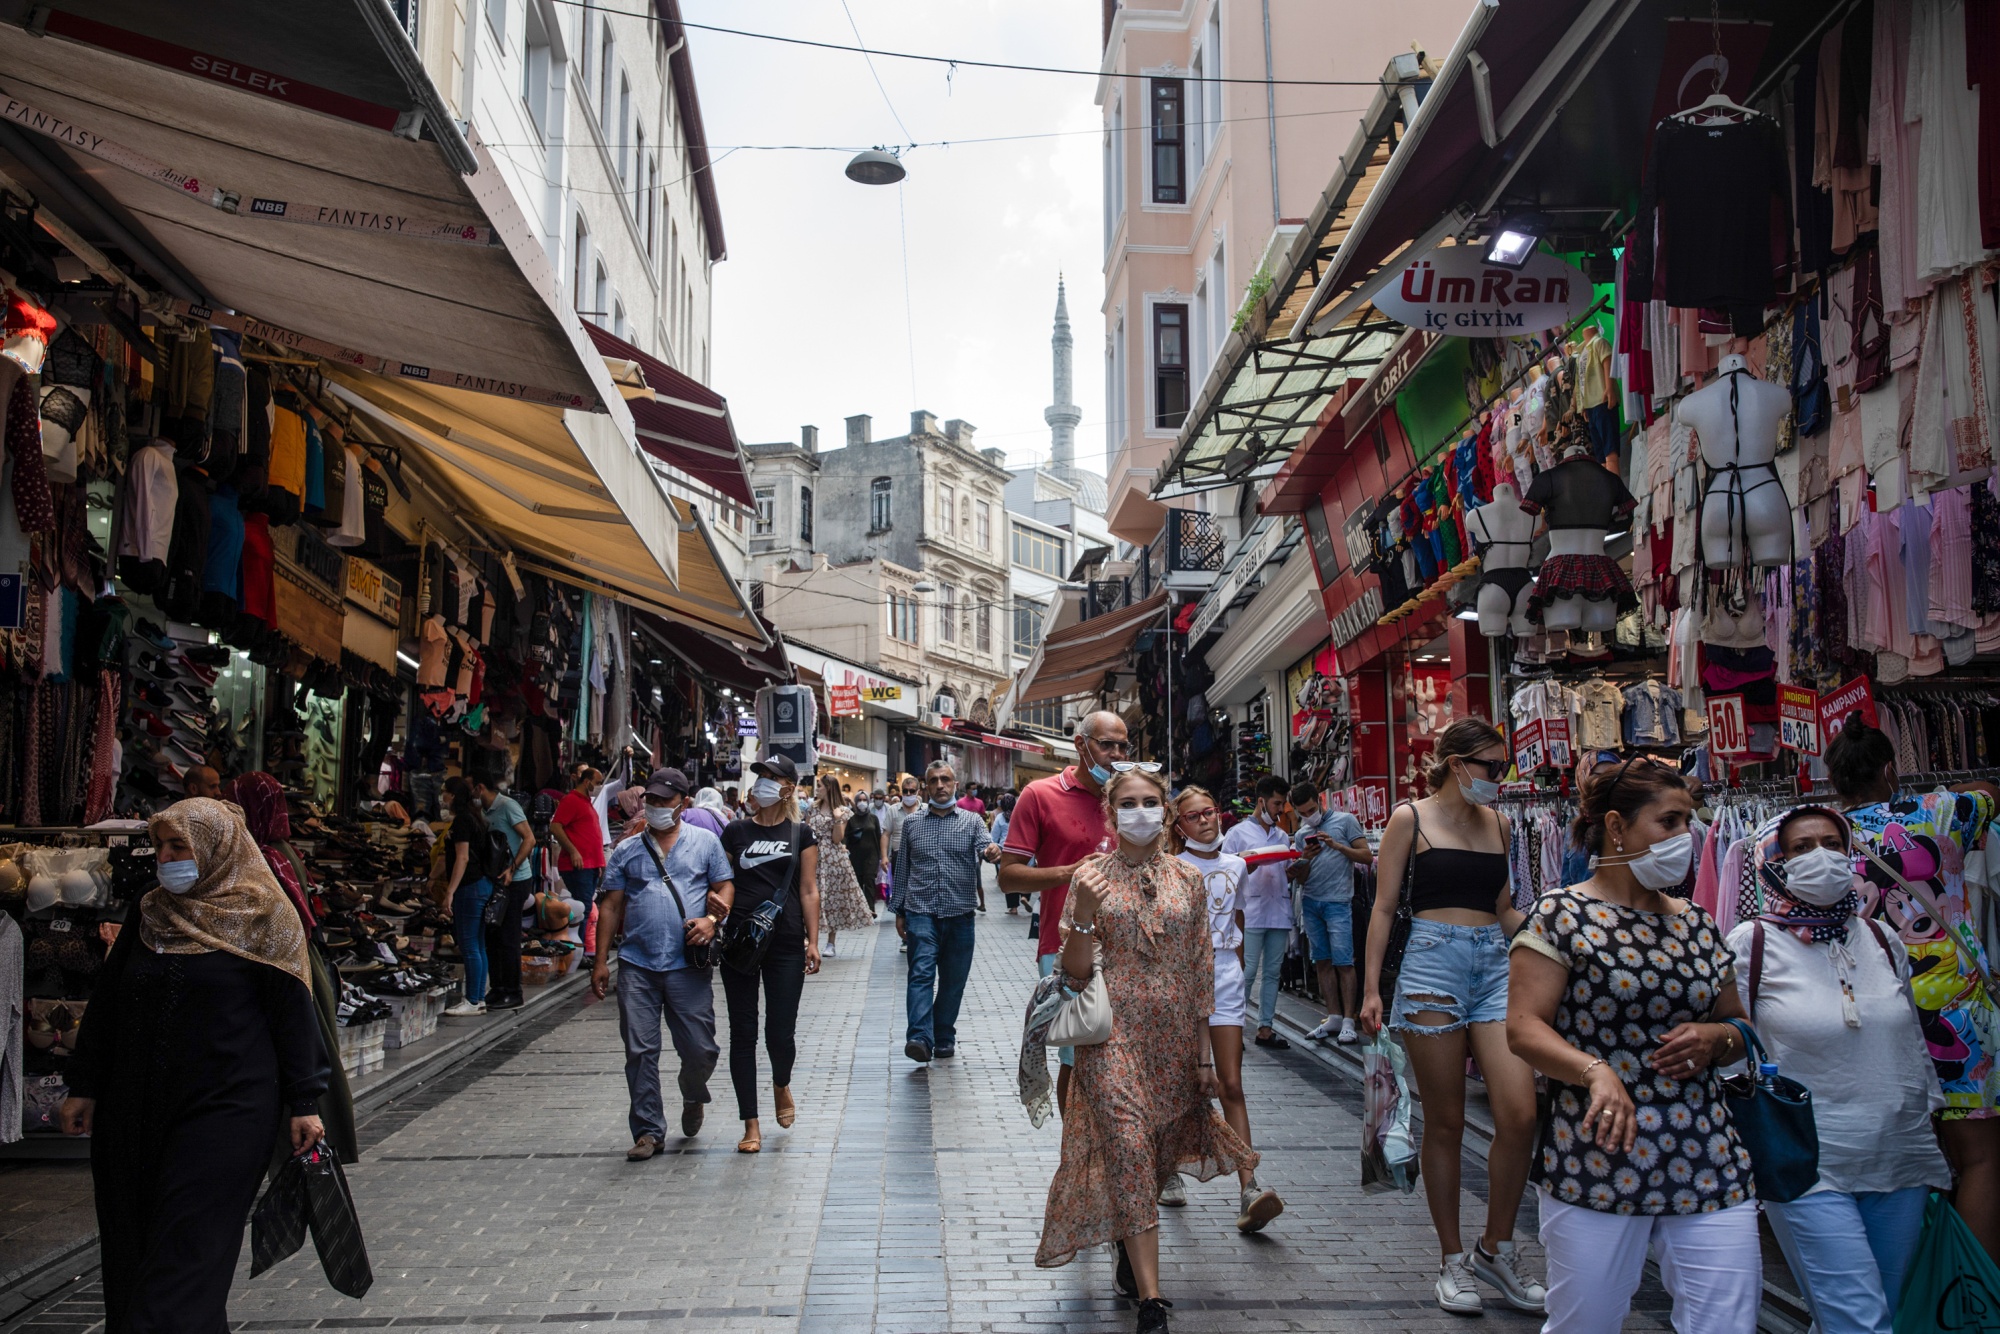 Turkey stands alone in emerging markets as economic woes deepen